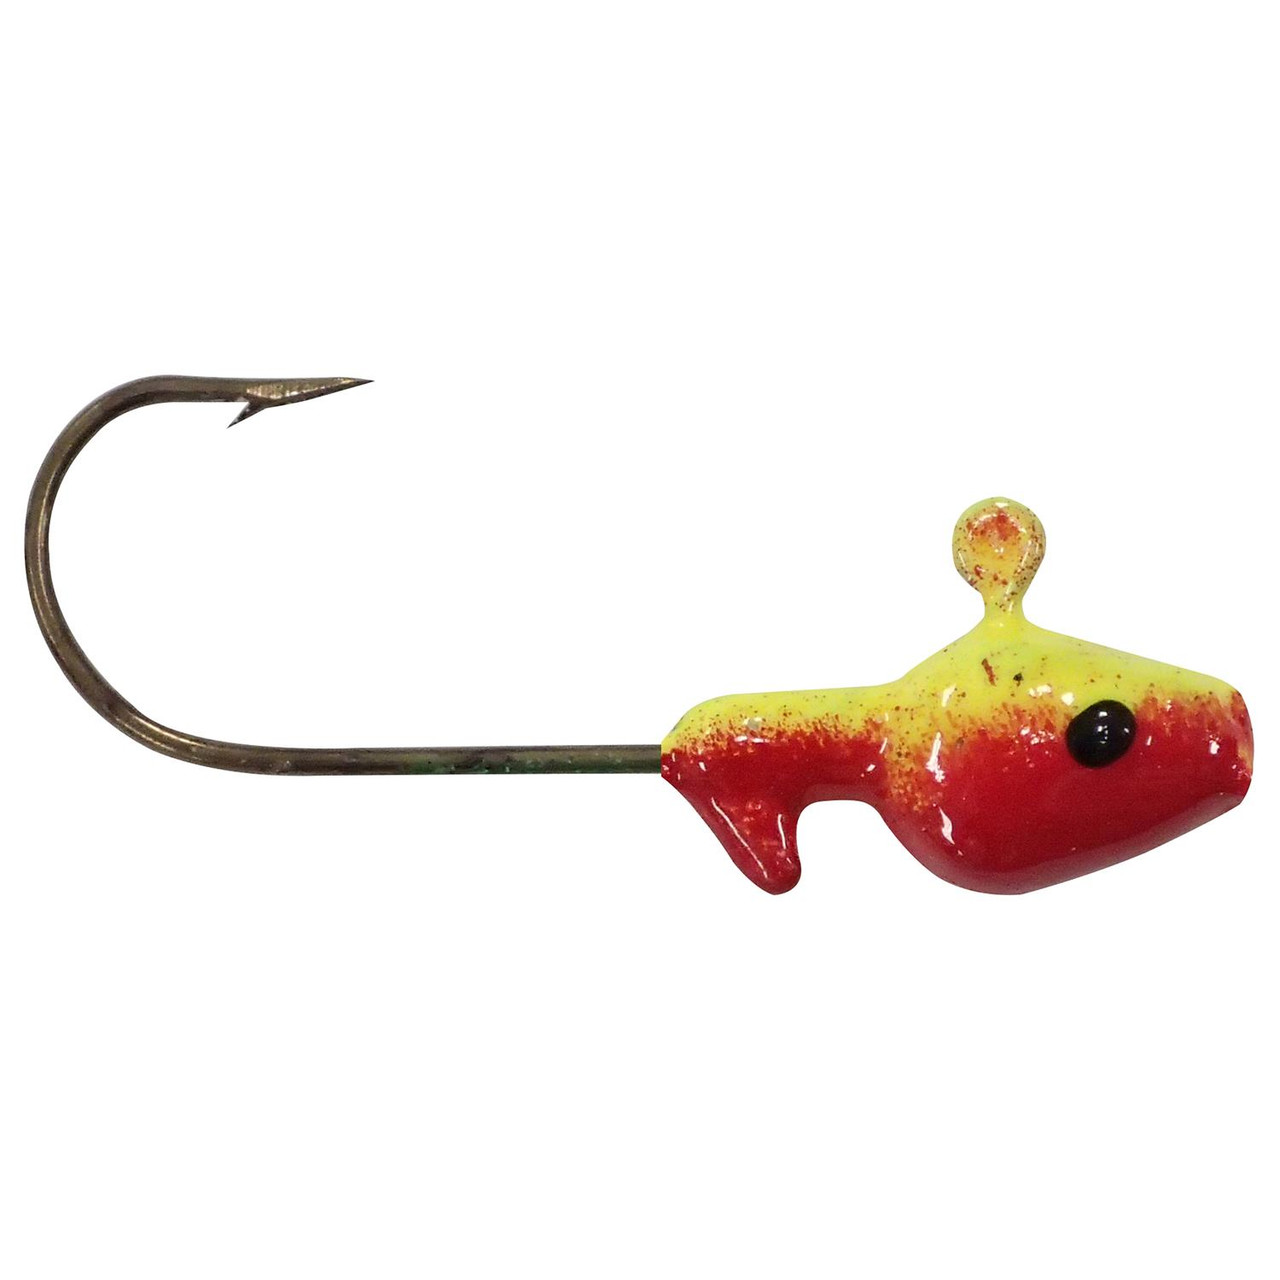 Southern Pro Painted Minnow Heads Jig Heads